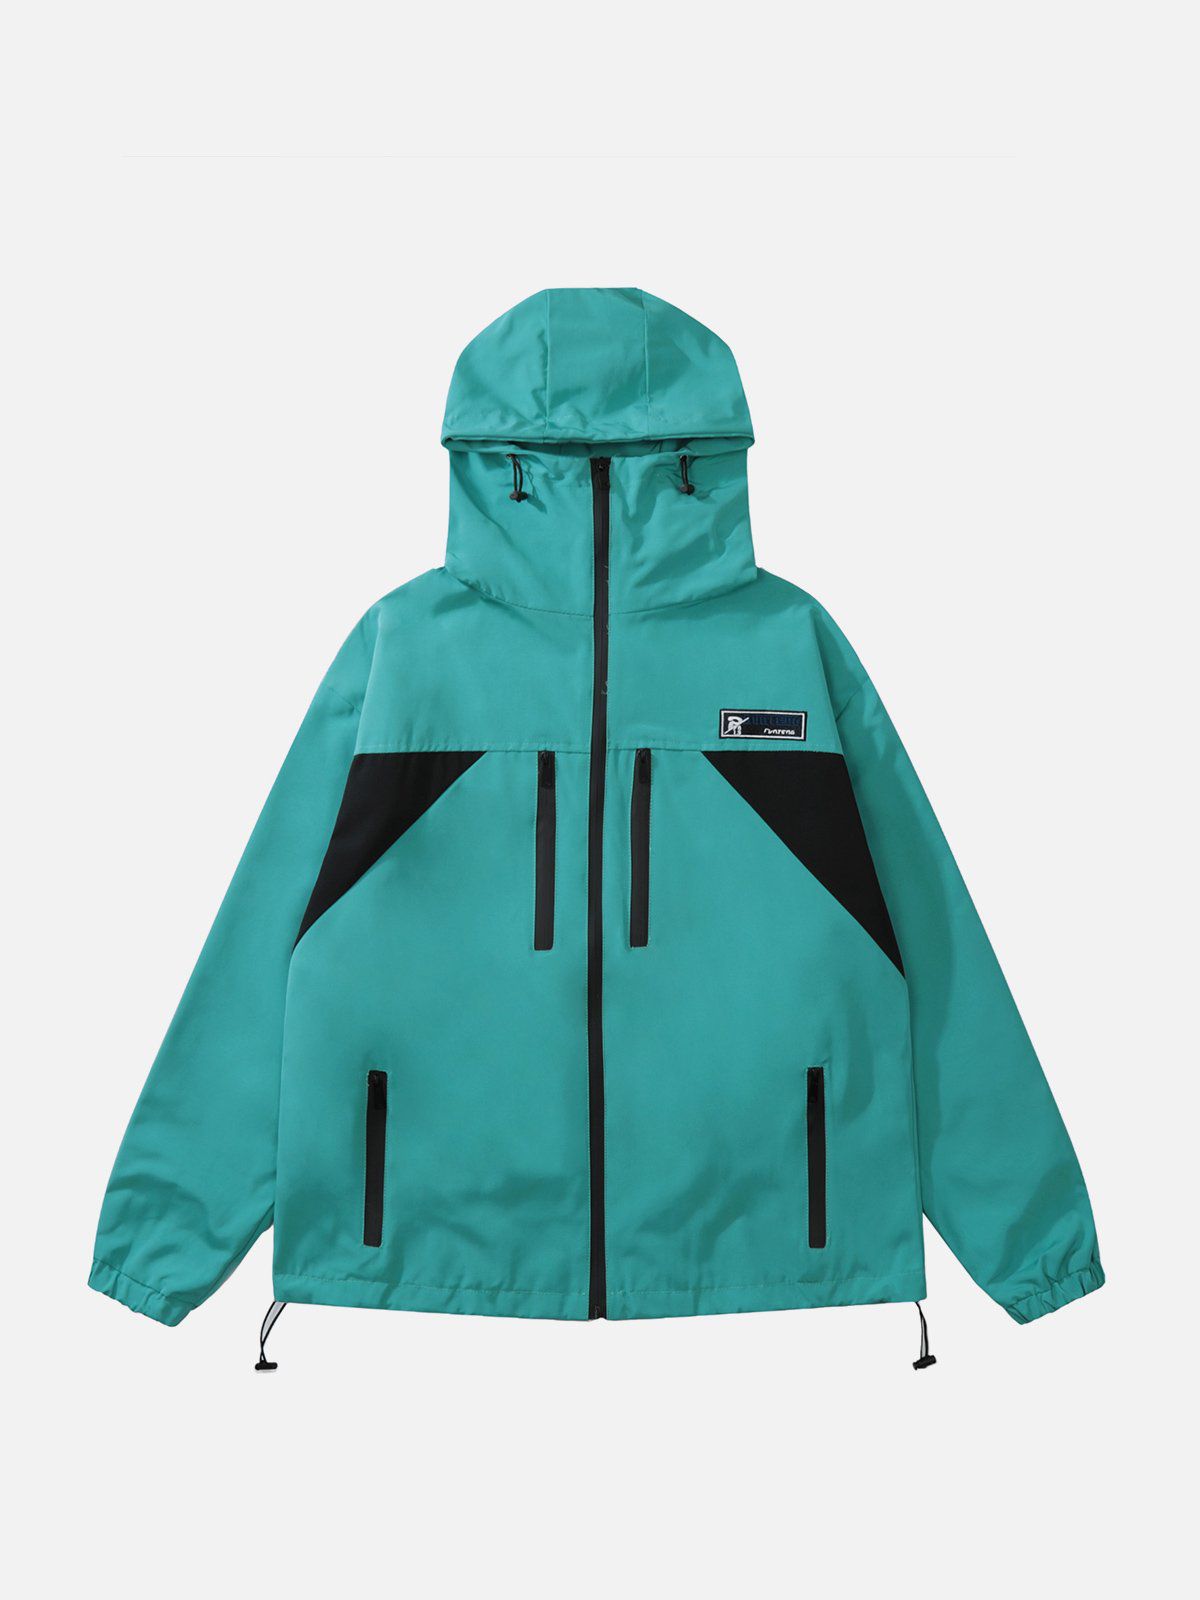 Majesda® - Colorblock Embroidered Hooded Anorak outfit ideas, streetwear fashion - majesda.com